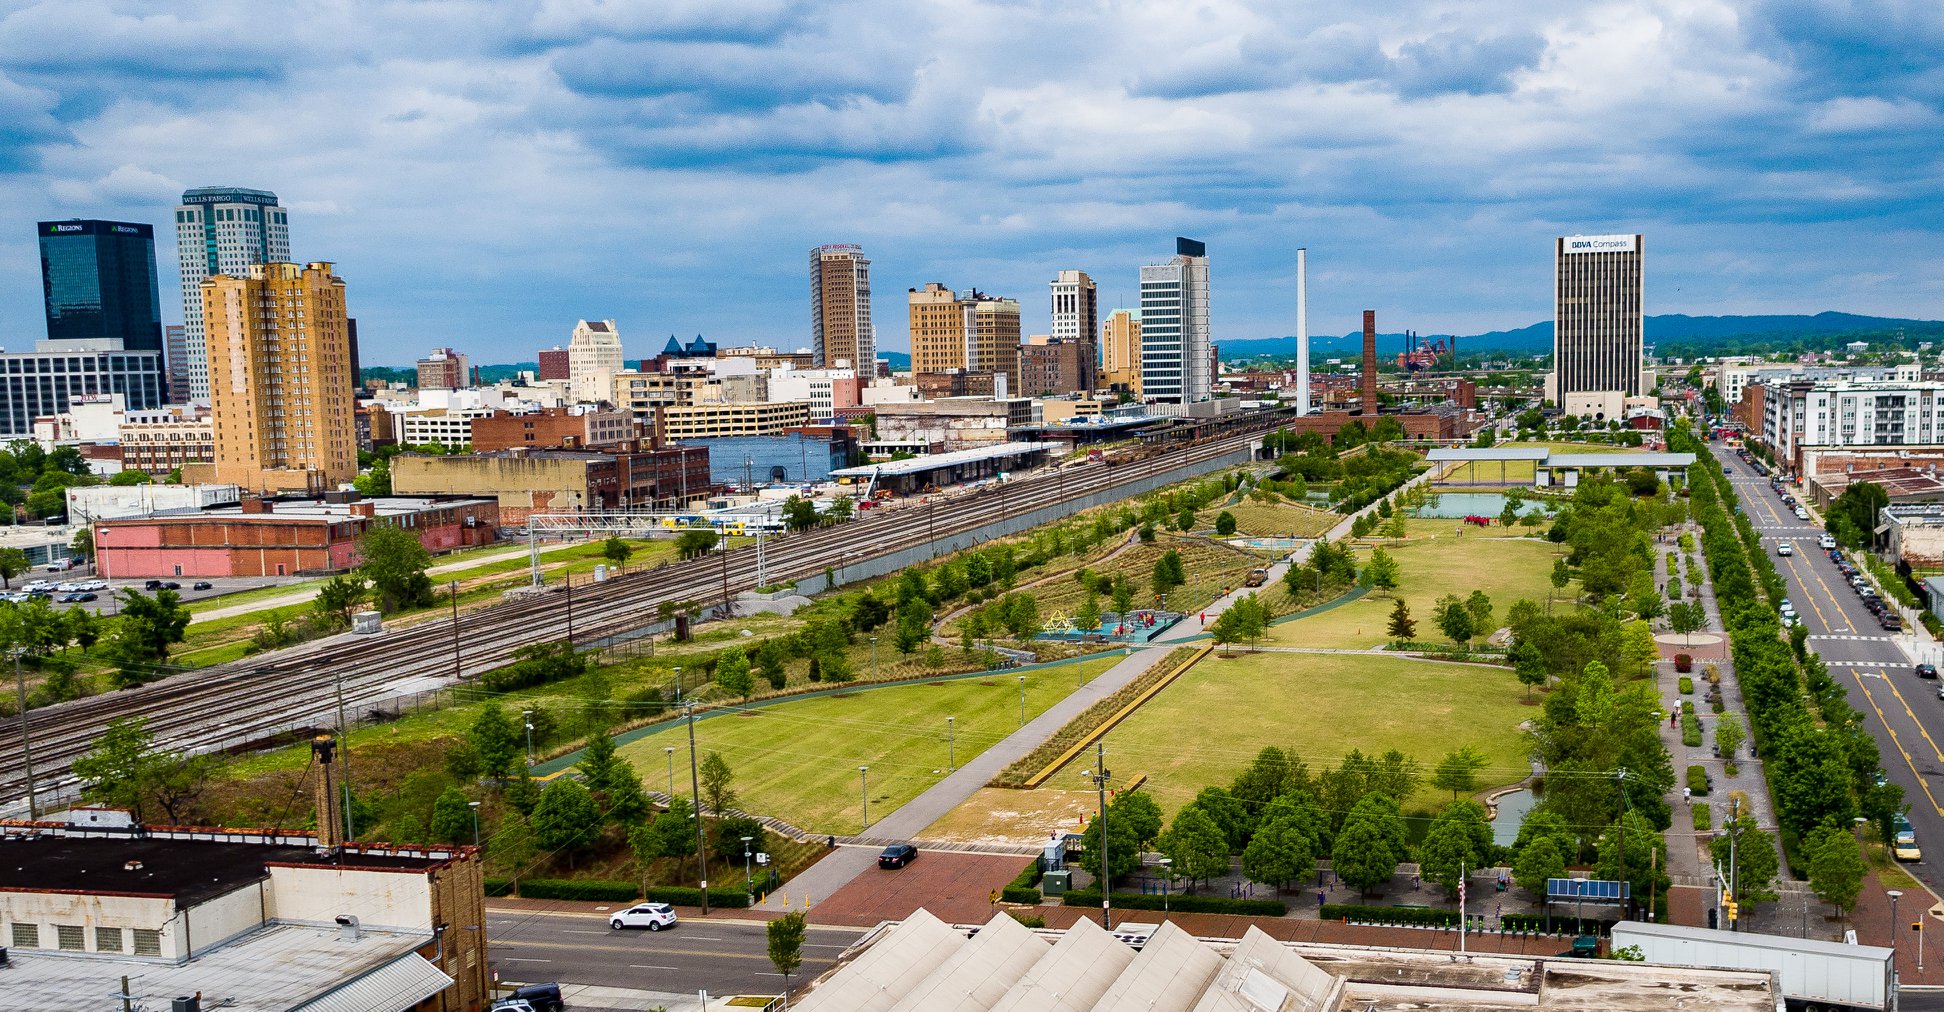 Railroad Park Parkside continues to grow as an innovation hotspot in Birmingham